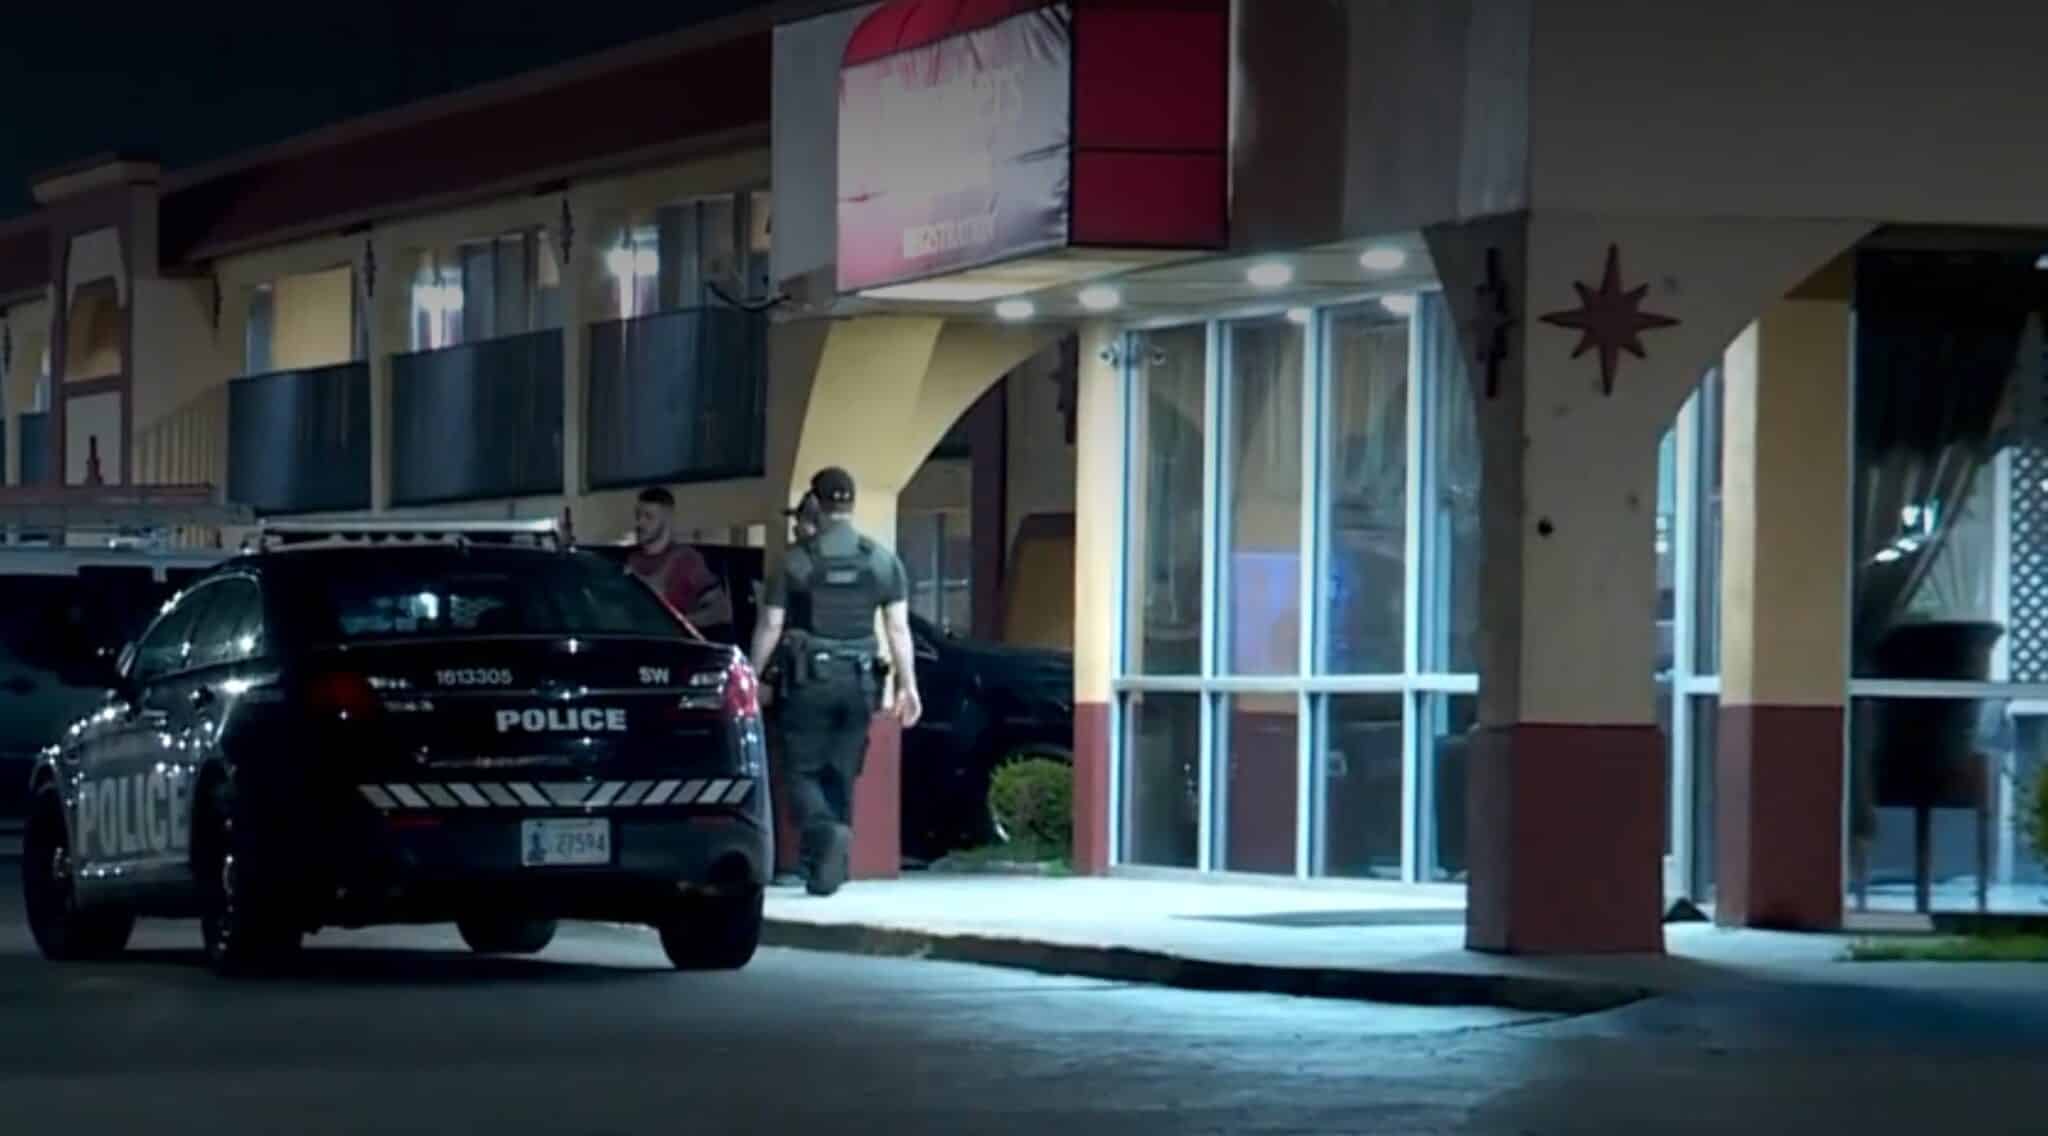 Man Shot By Armed Clerk After Causing Disturbance At Hotel And Threatening Clerk